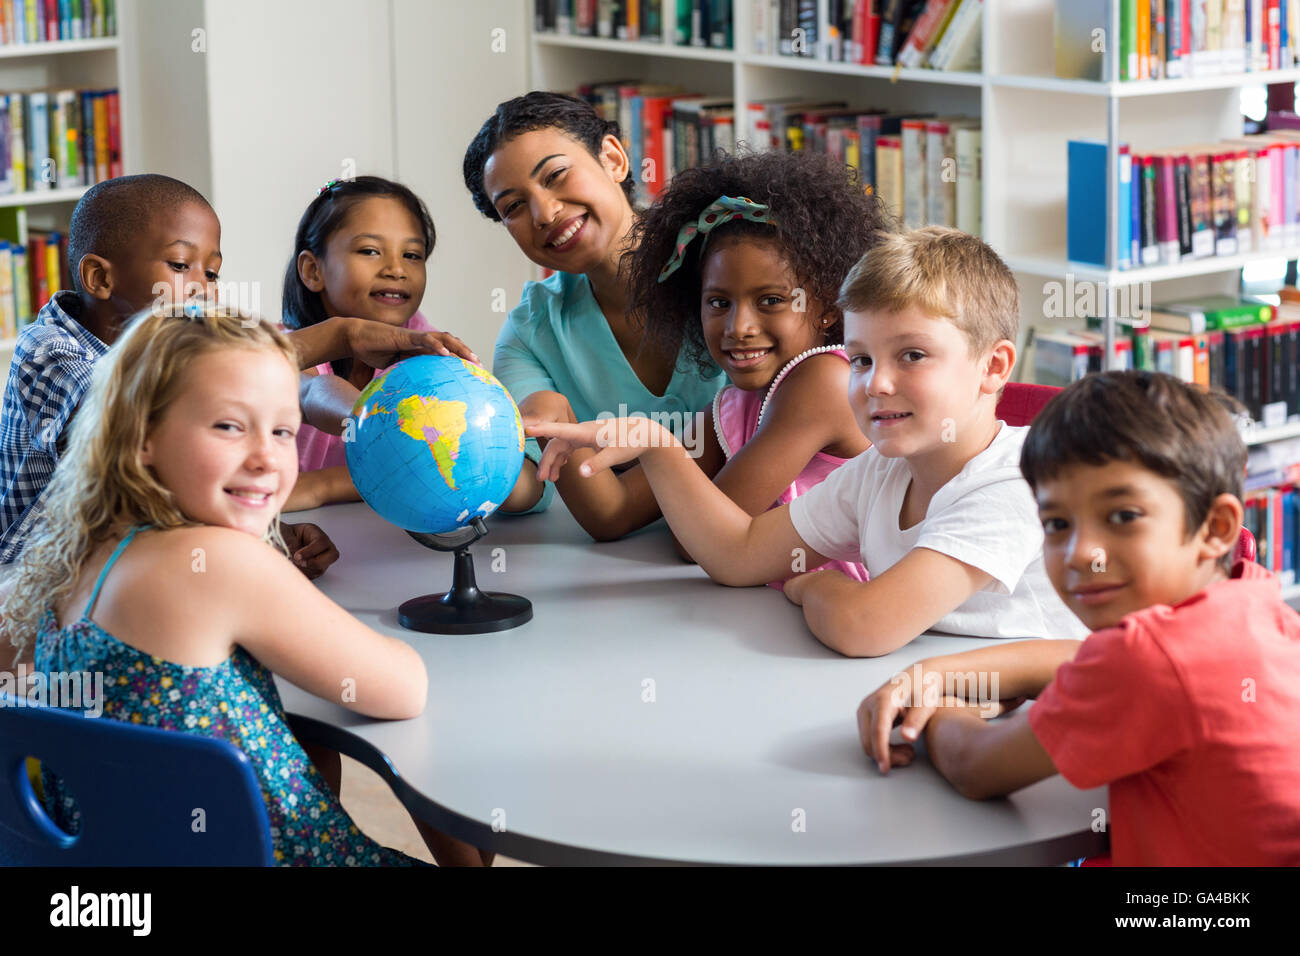 Female teacher and children with globe on table Stock Photo